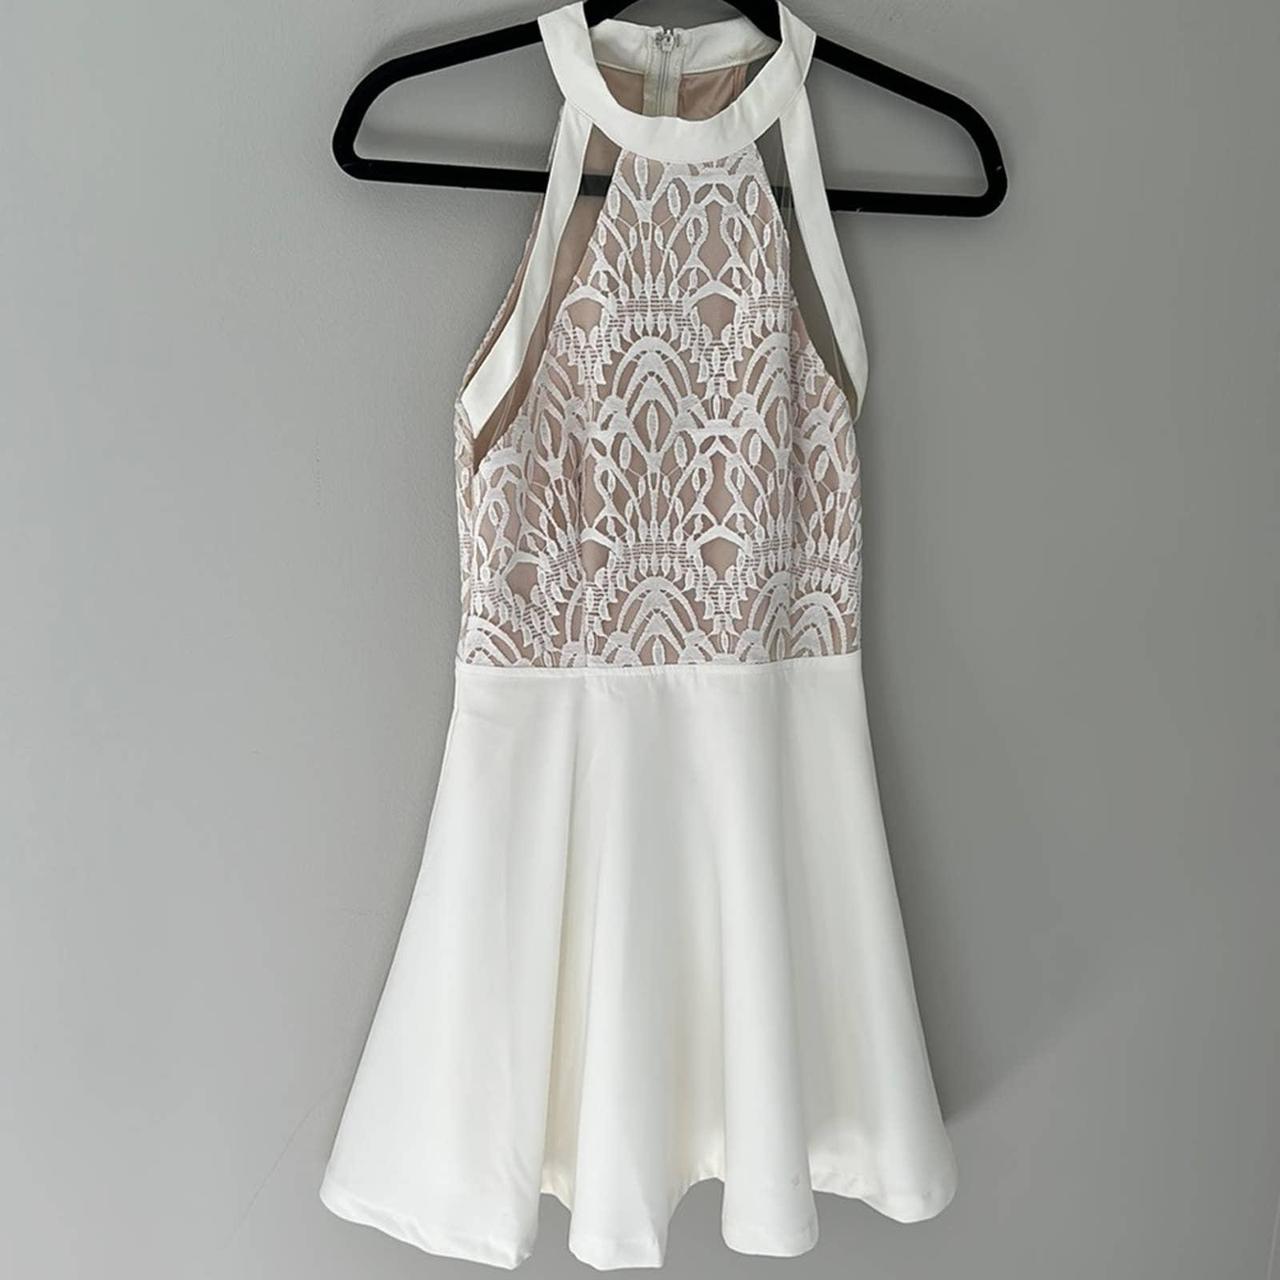 Missguided Women's Cream and White Dress